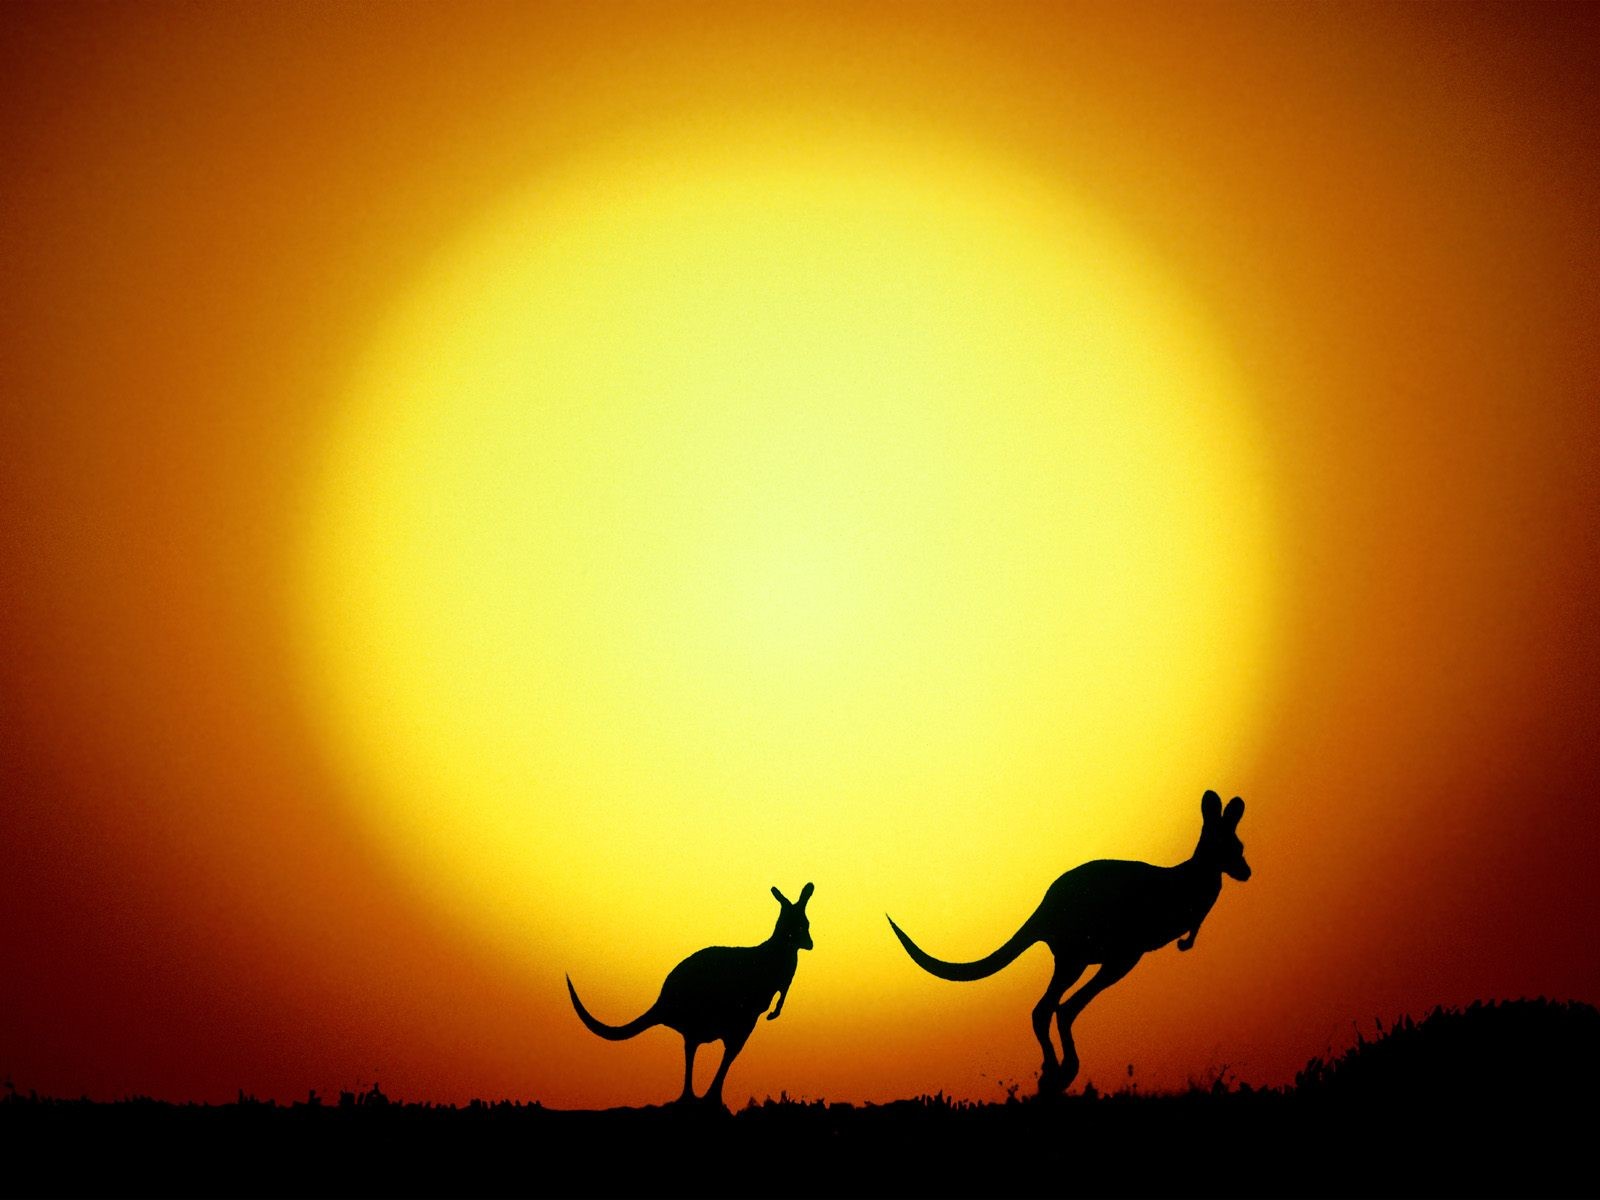 Kangaroo silhouette against a scenic background